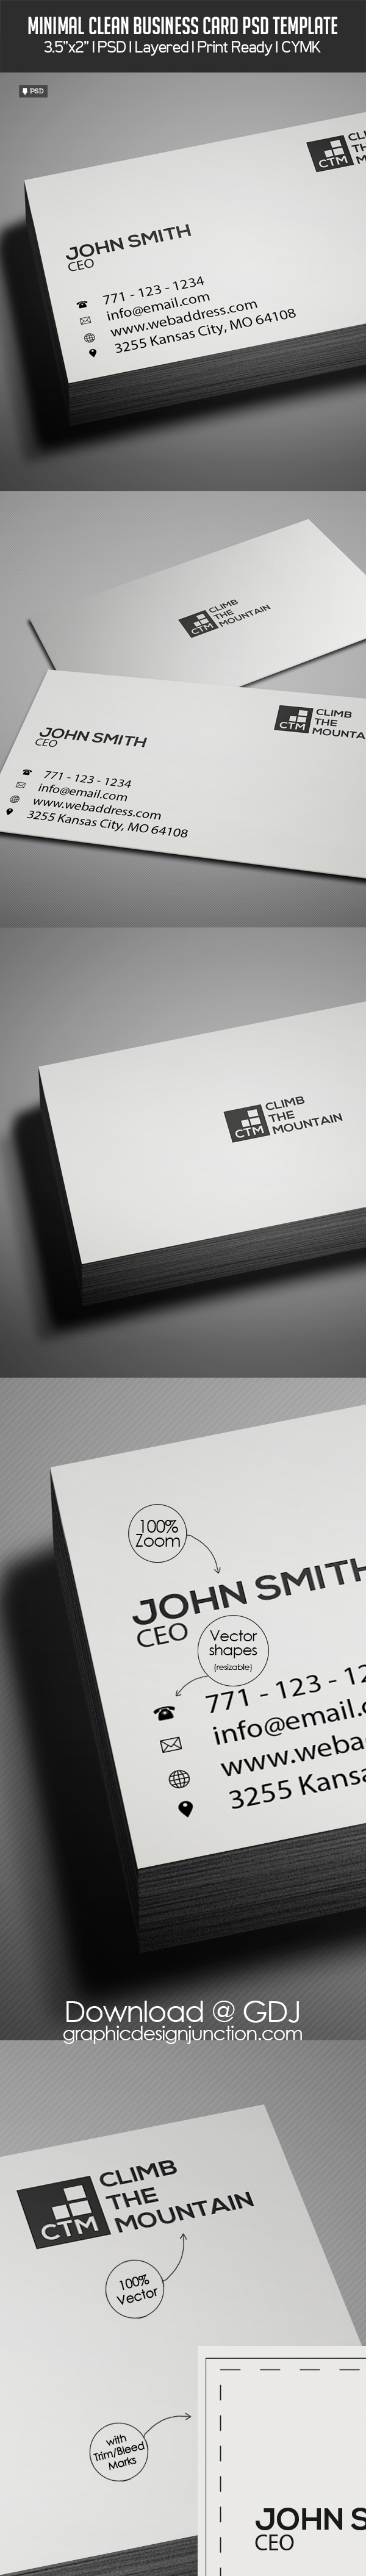 Free Minimal Clean Business Card PSD Template